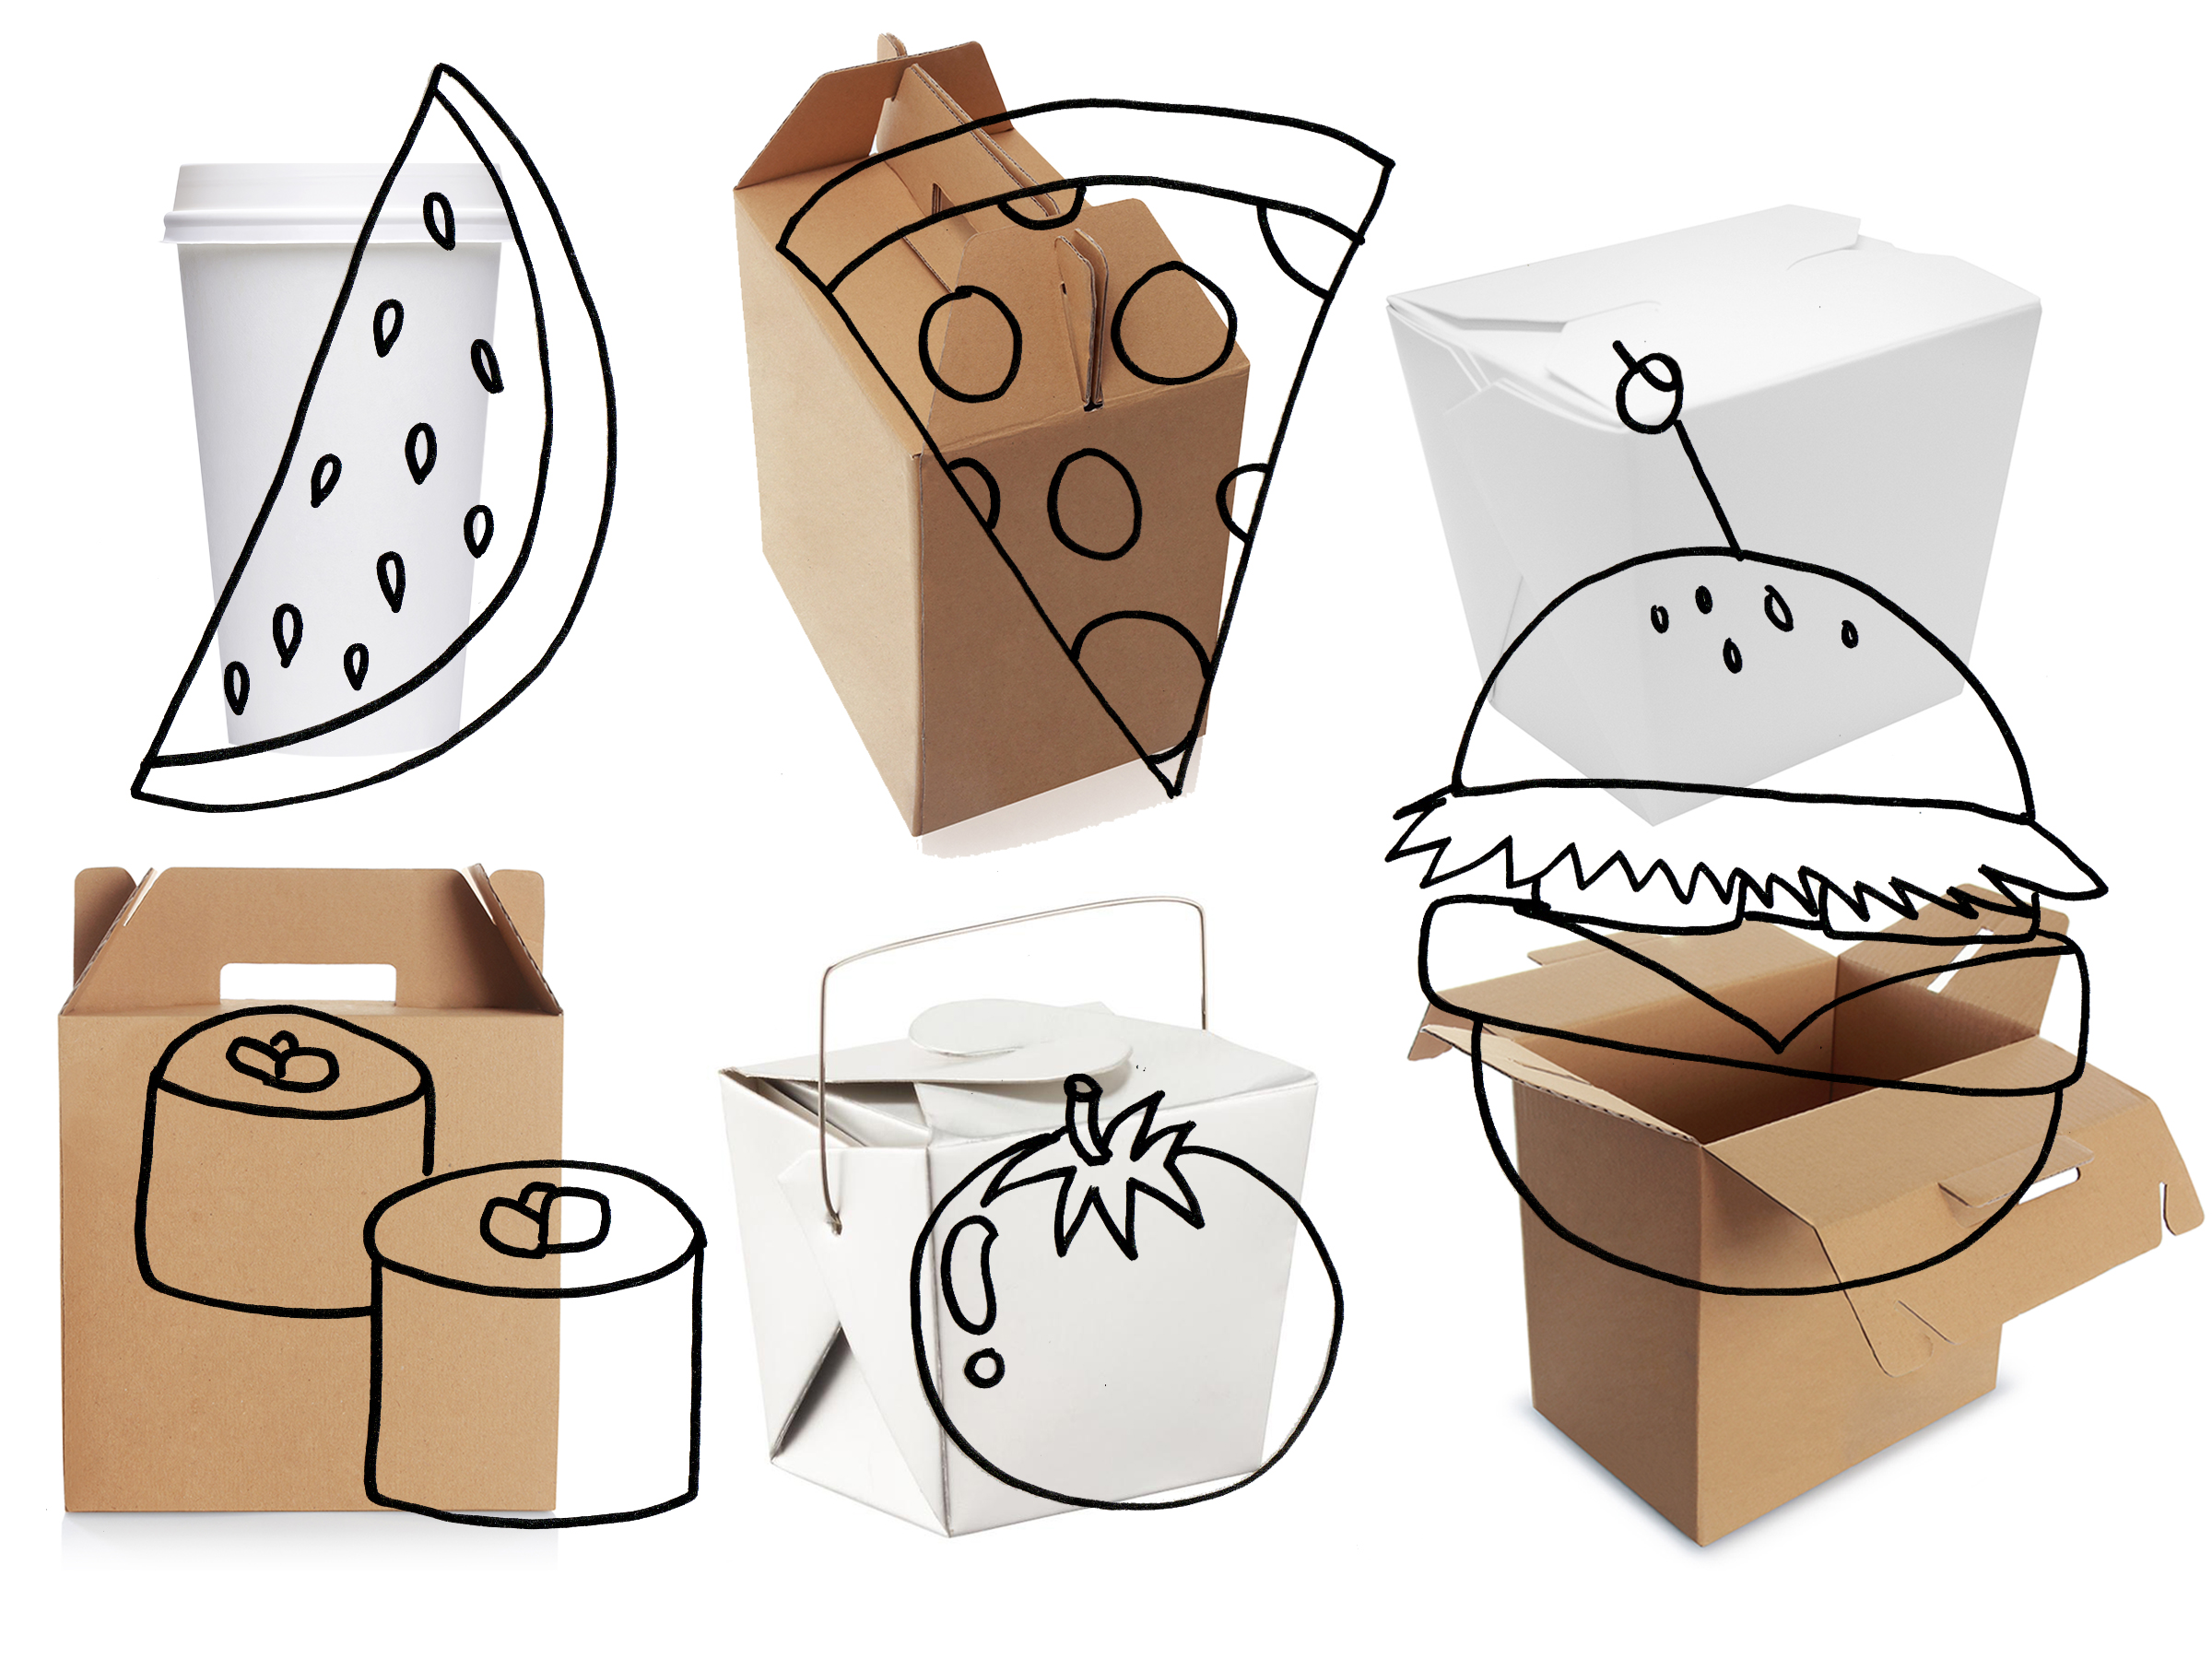 25 Awesome Examples of Restaurant Branding & Packaging